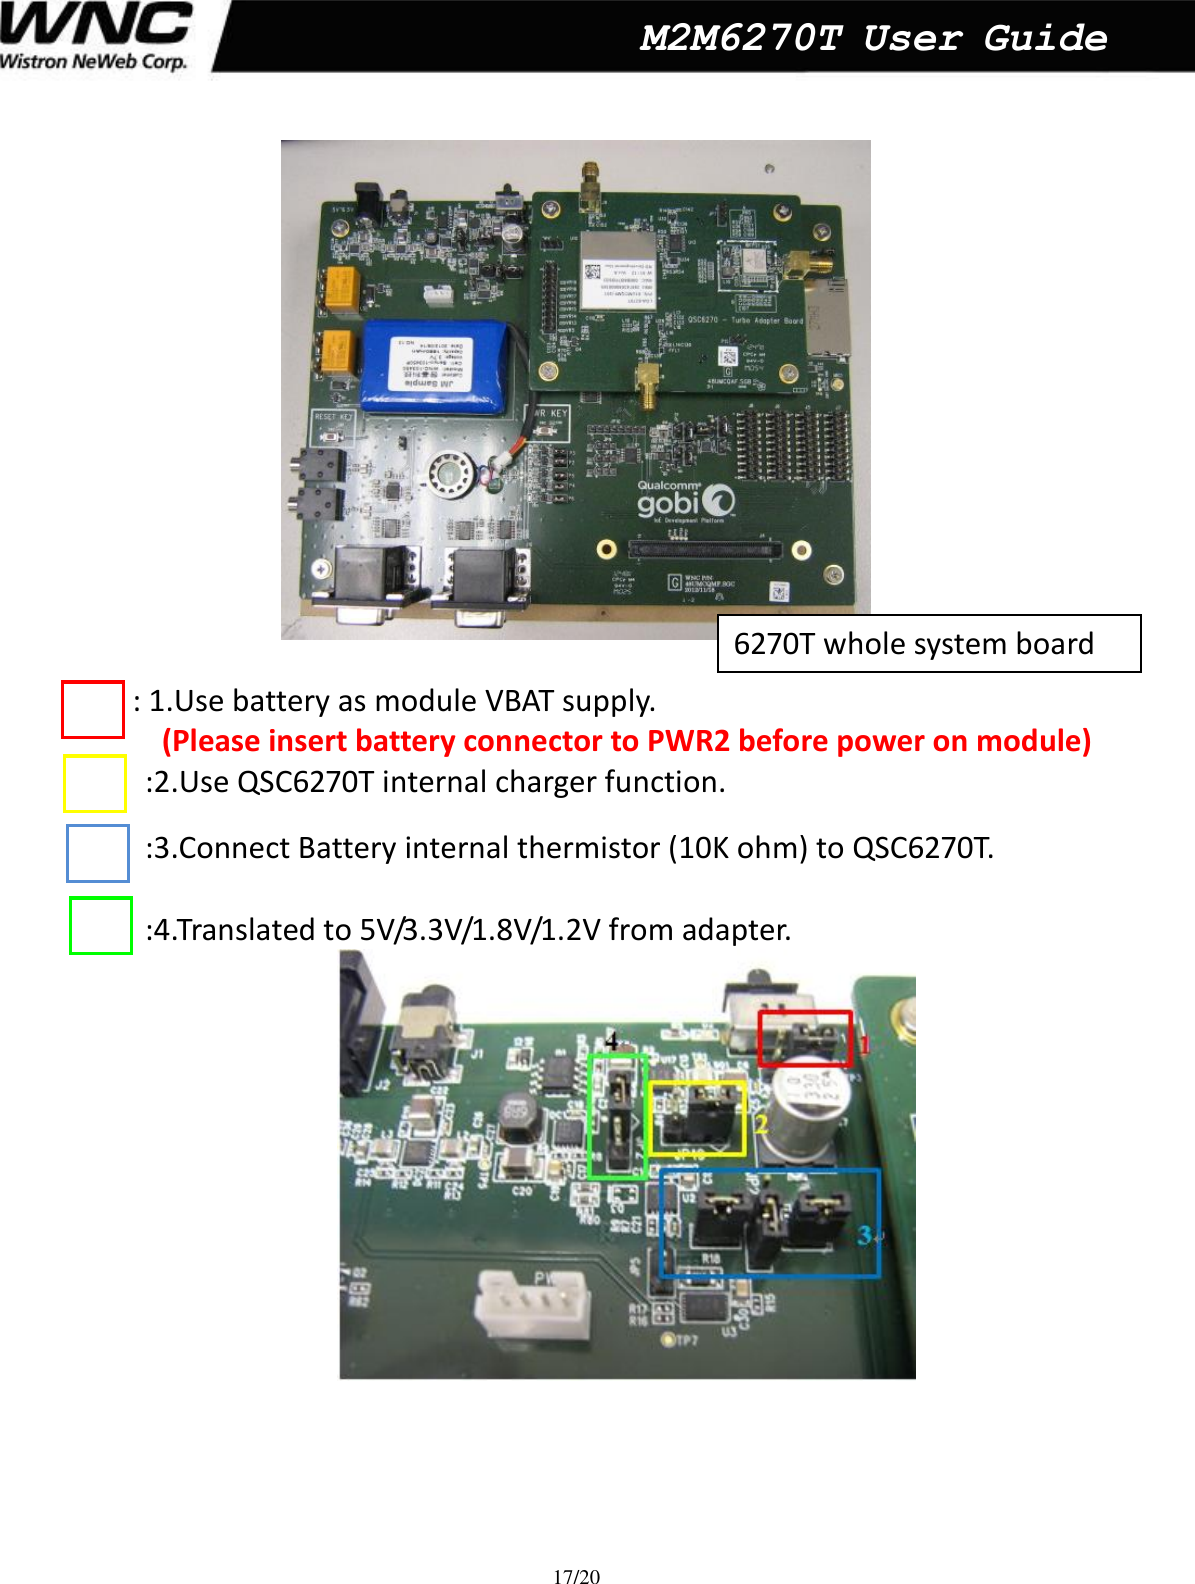  17/20  M2M6270T User Guide   : 1.Use battery as module VBAT supply.          (Please insert battery connector to PWR2 before power on module) :2.Use QSC6270T internal charger function.  :3.Connect Battery internal thermistor (10K ohm) to QSC6270T.   :4.Translated to 5V/3.3V/1.8V/1.2V from adapter.           6270T whole system board 